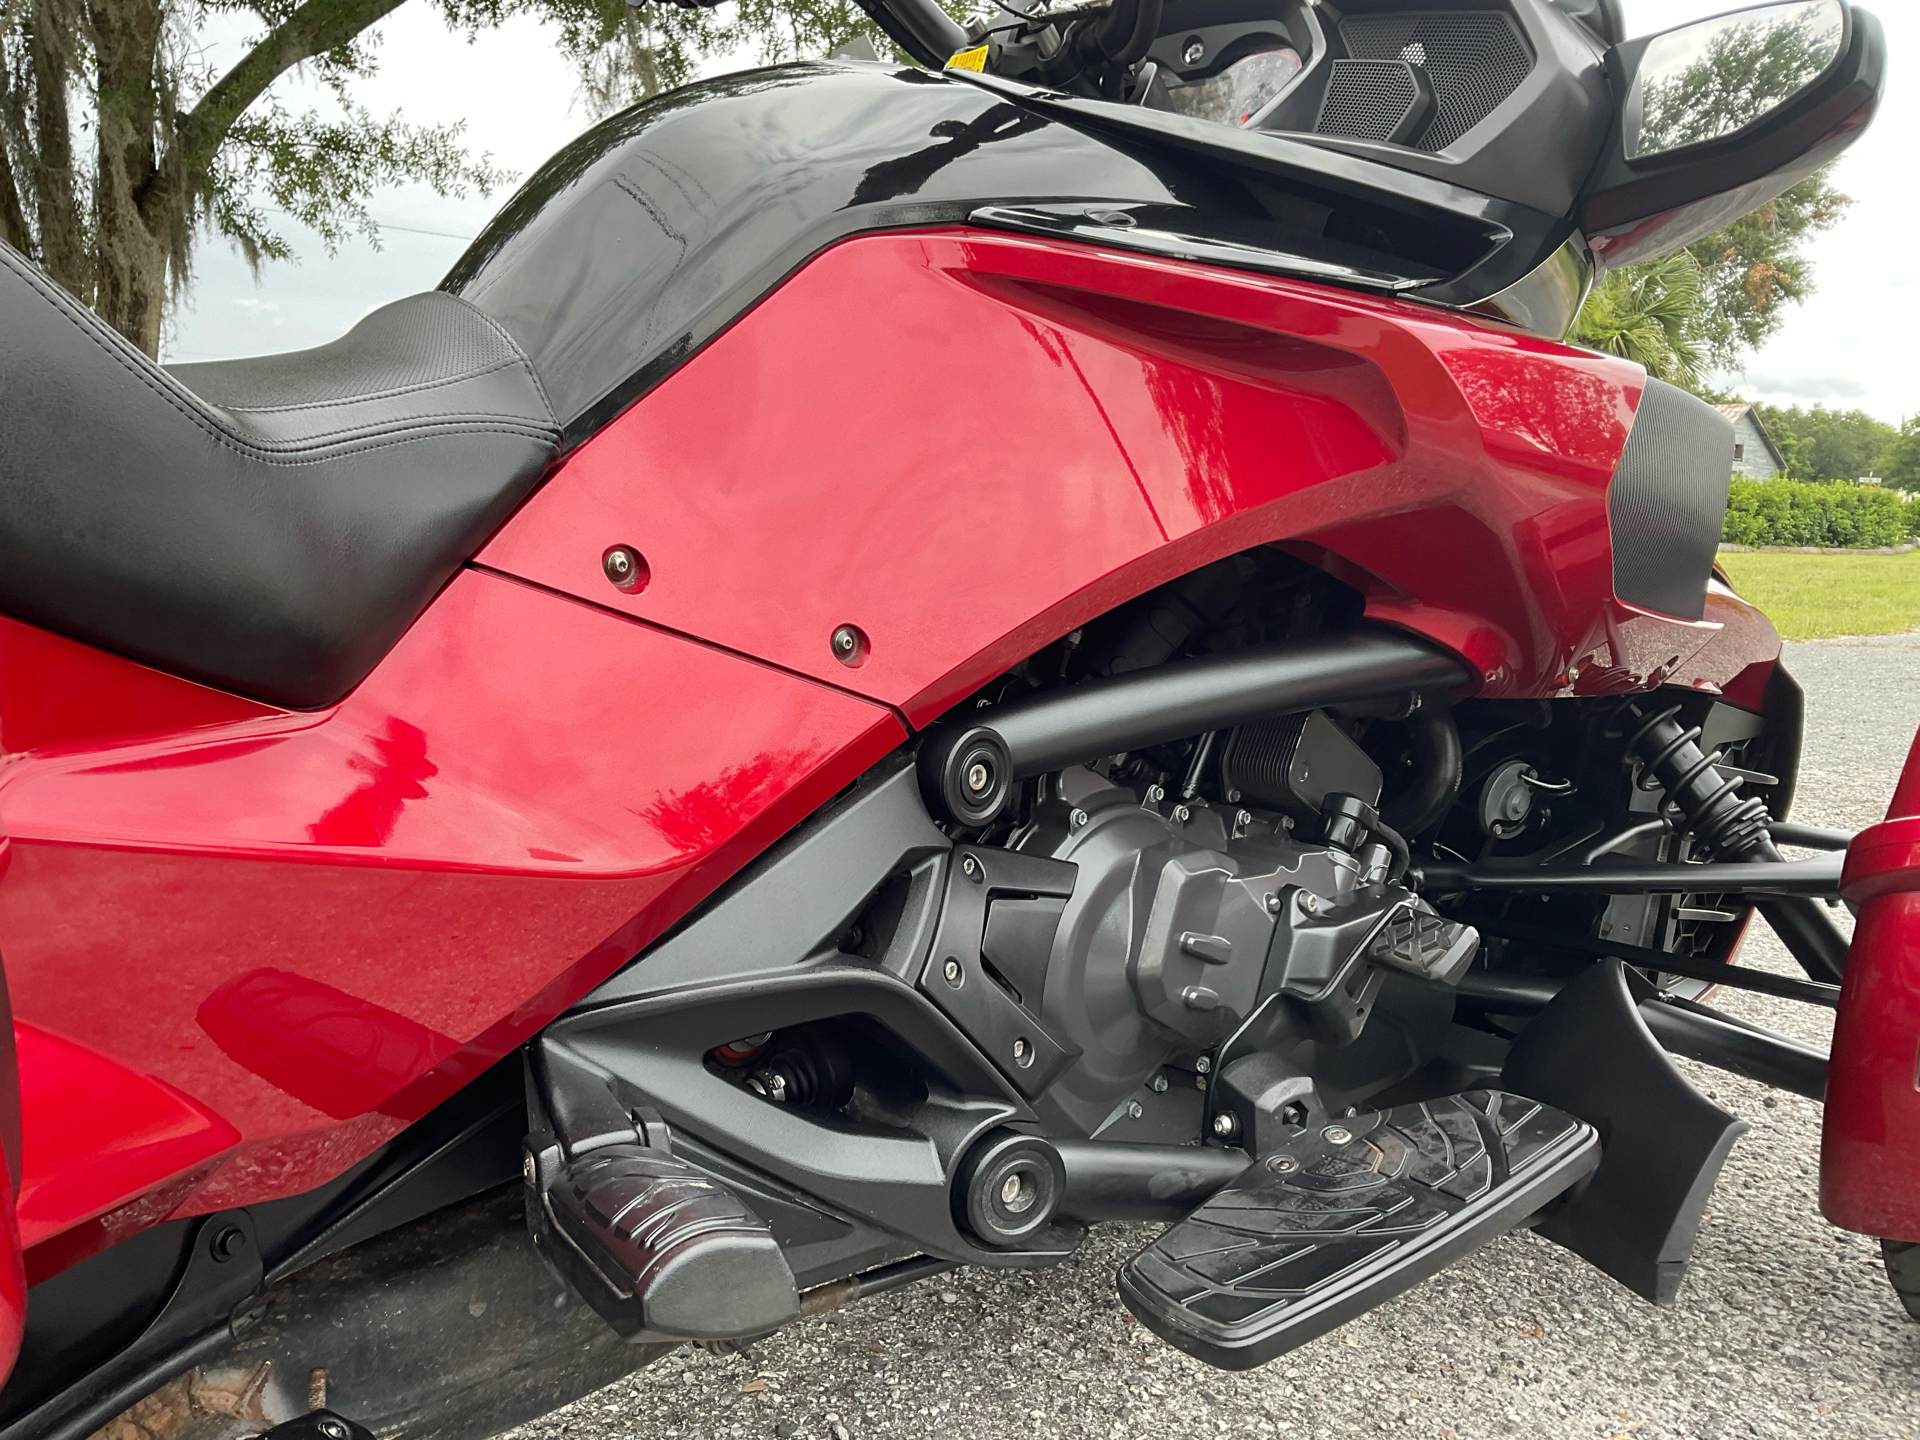 2017 Can-Am Spyder F3 Limited in Sanford, Florida - Photo 12